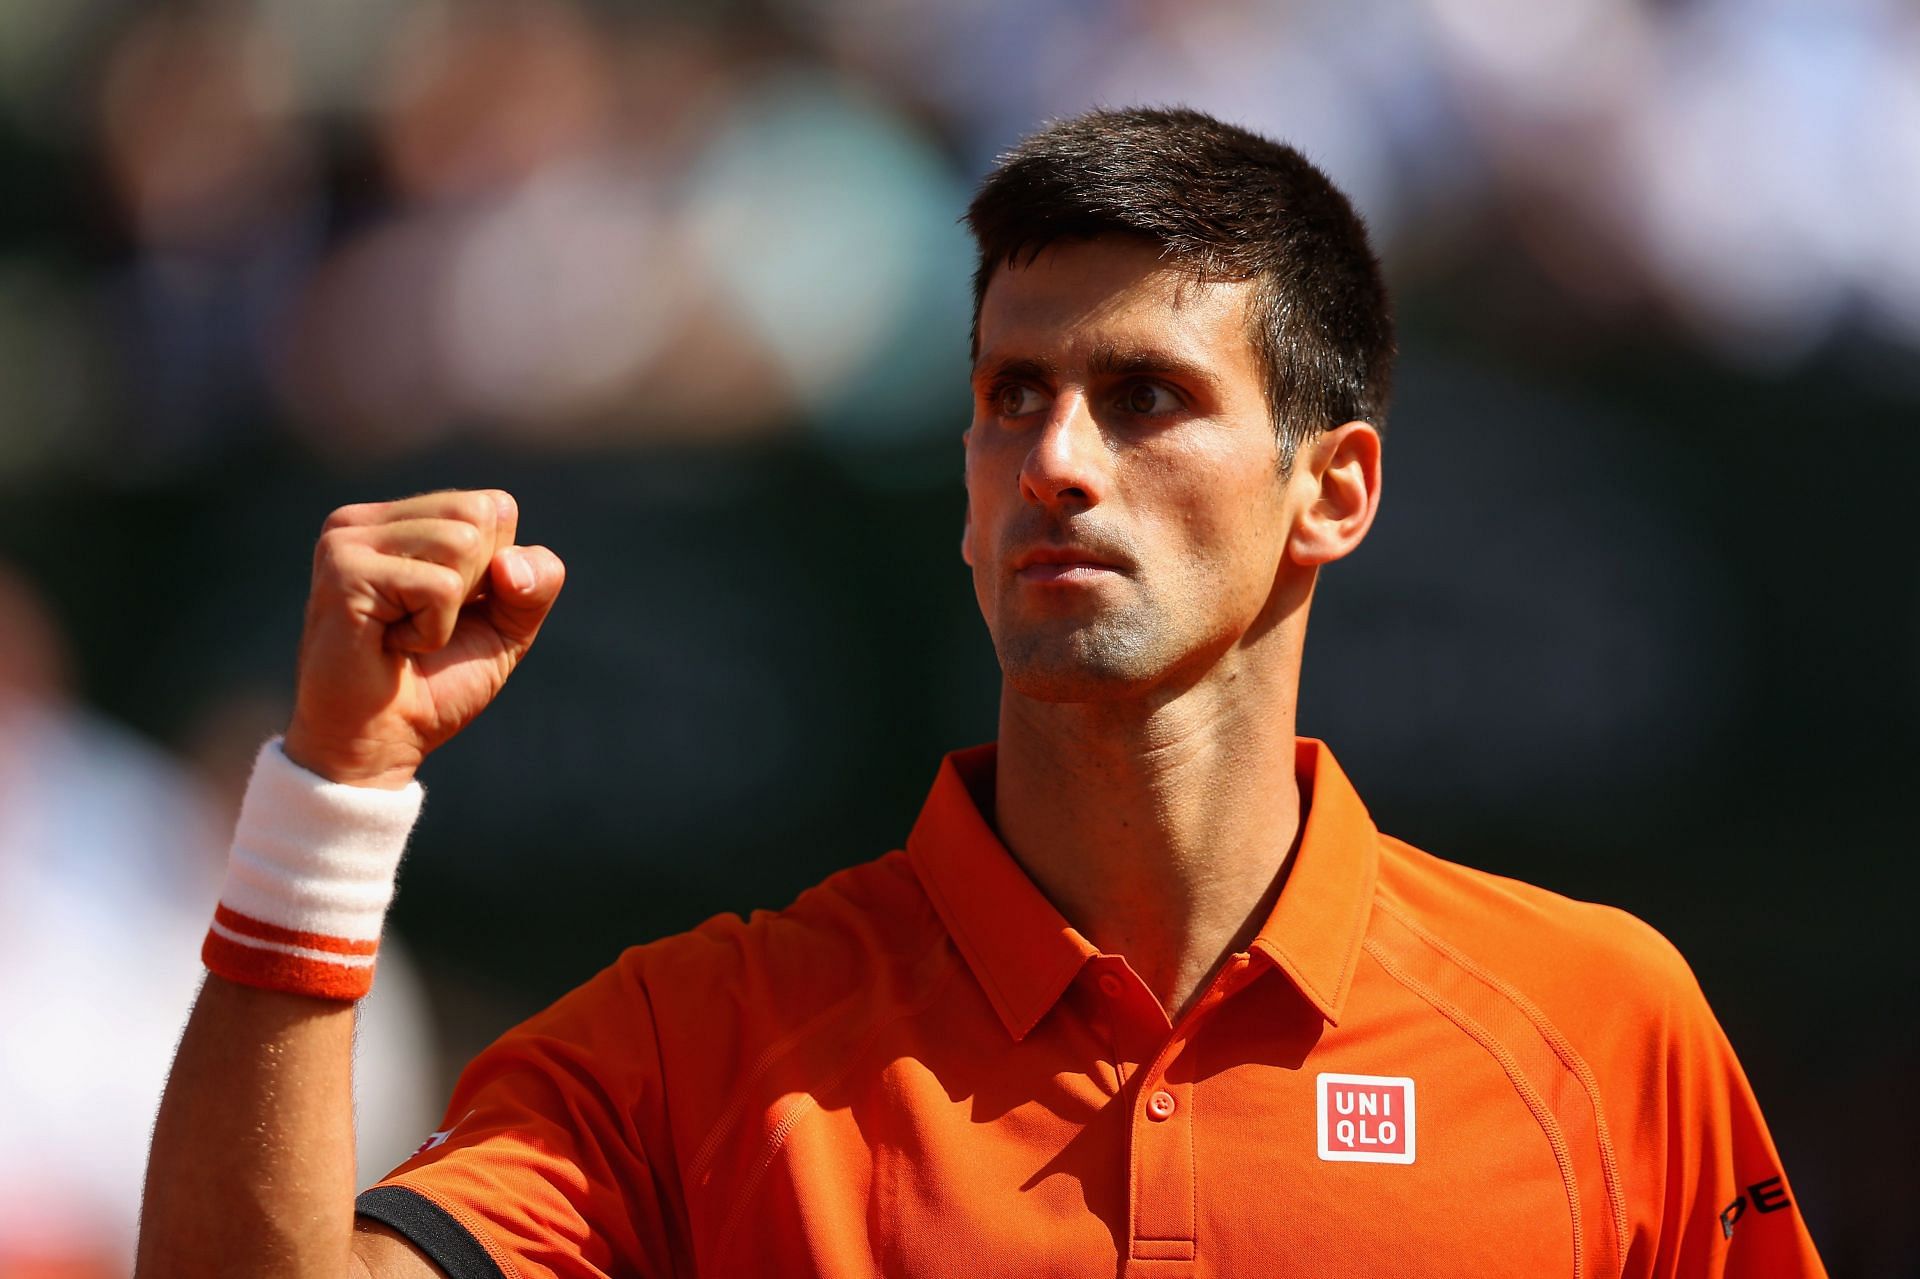 Novak Djokovic pictured at the 2015 French Open